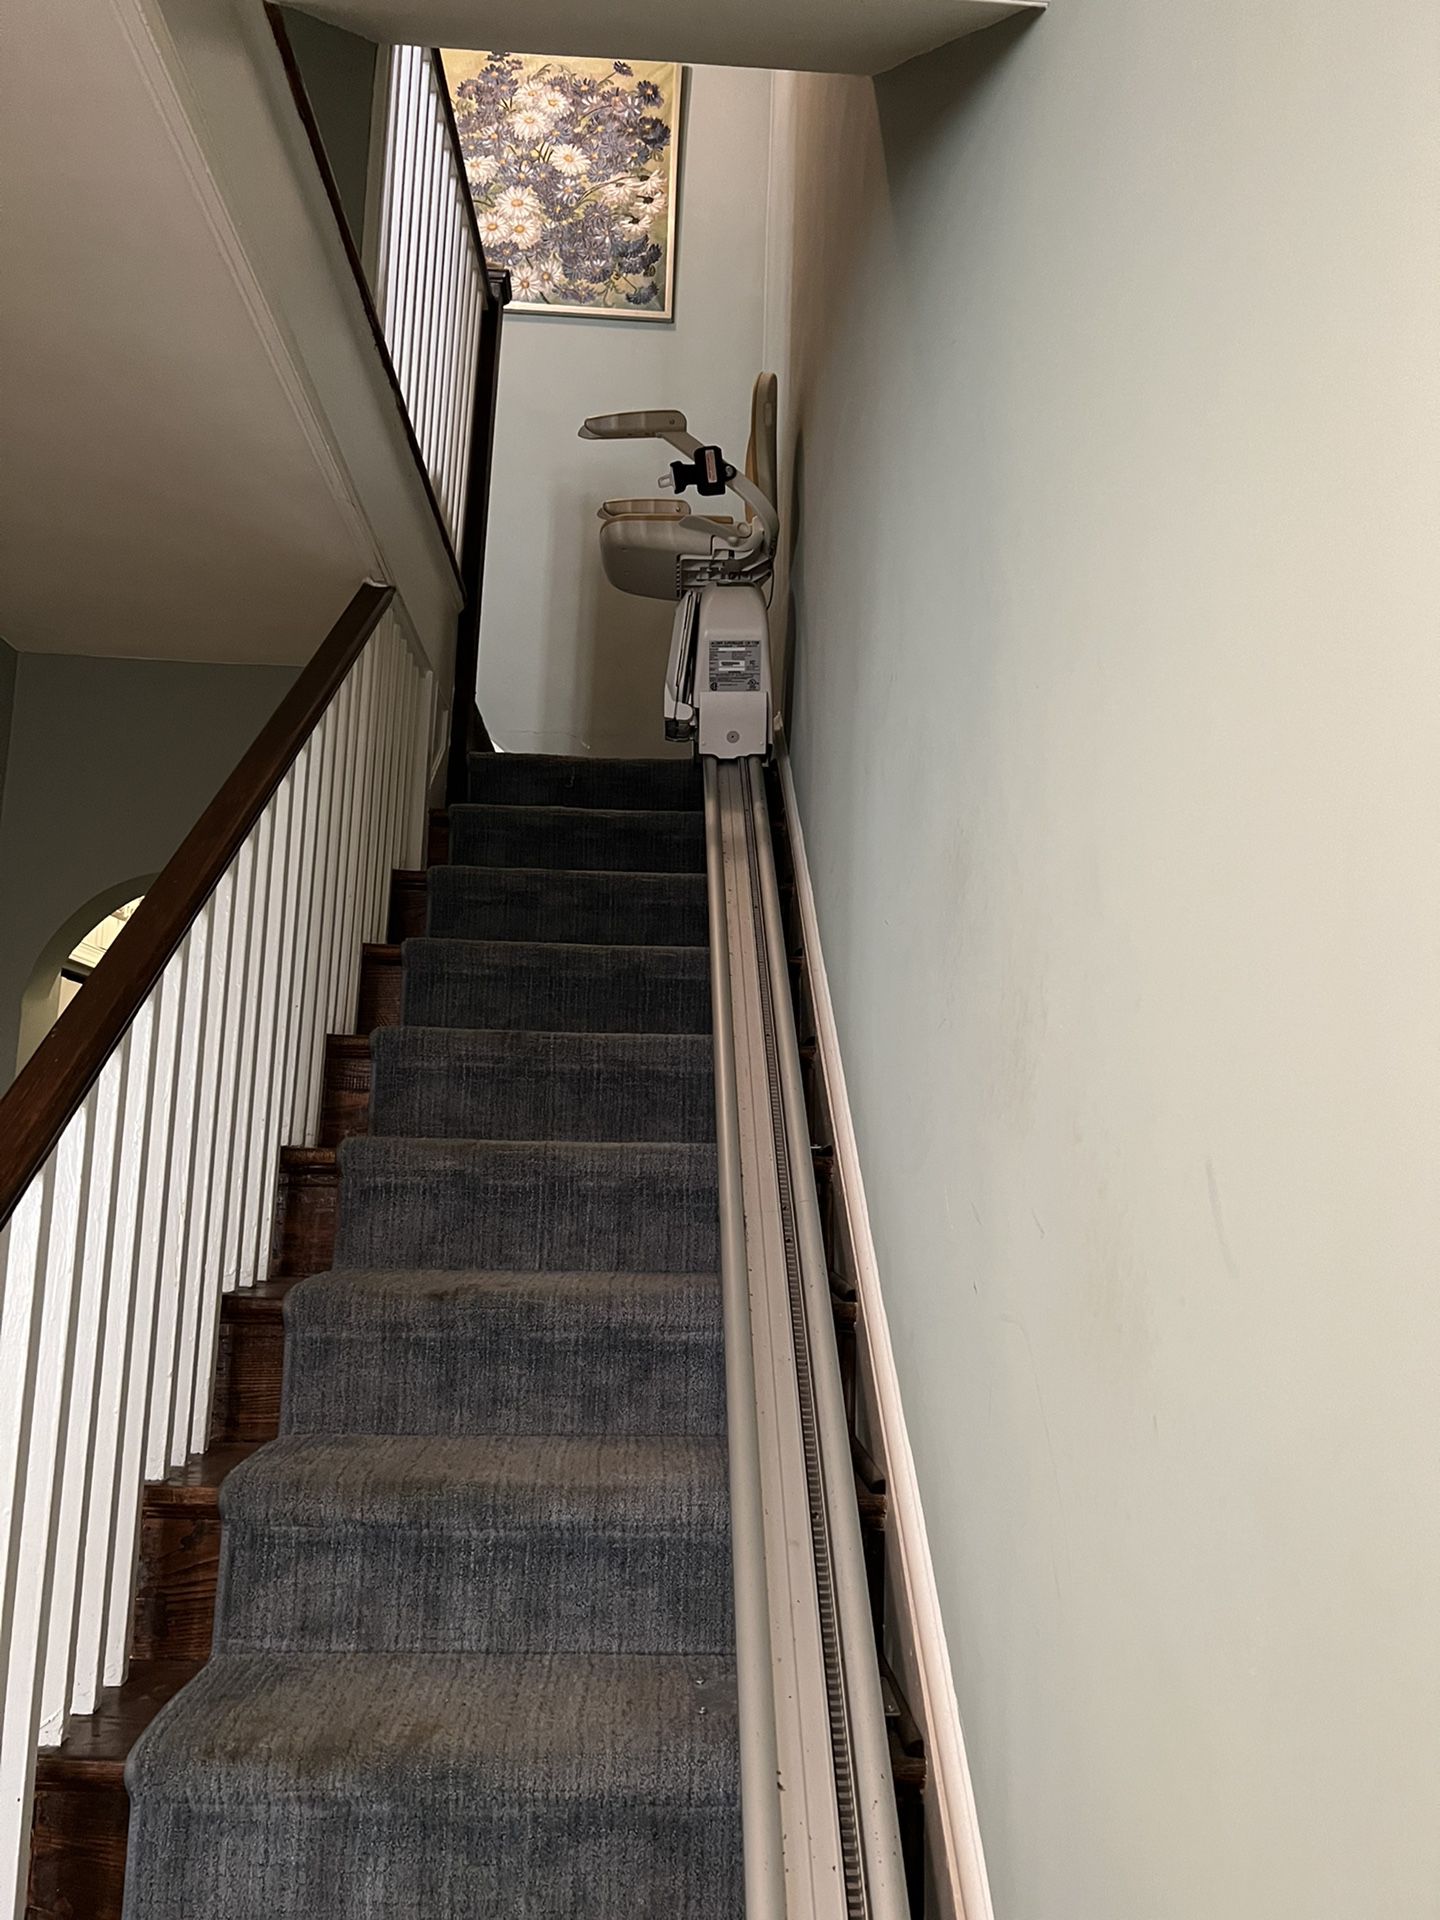 Acorn Superglide  130 stairlift  with two (2) remote  controls